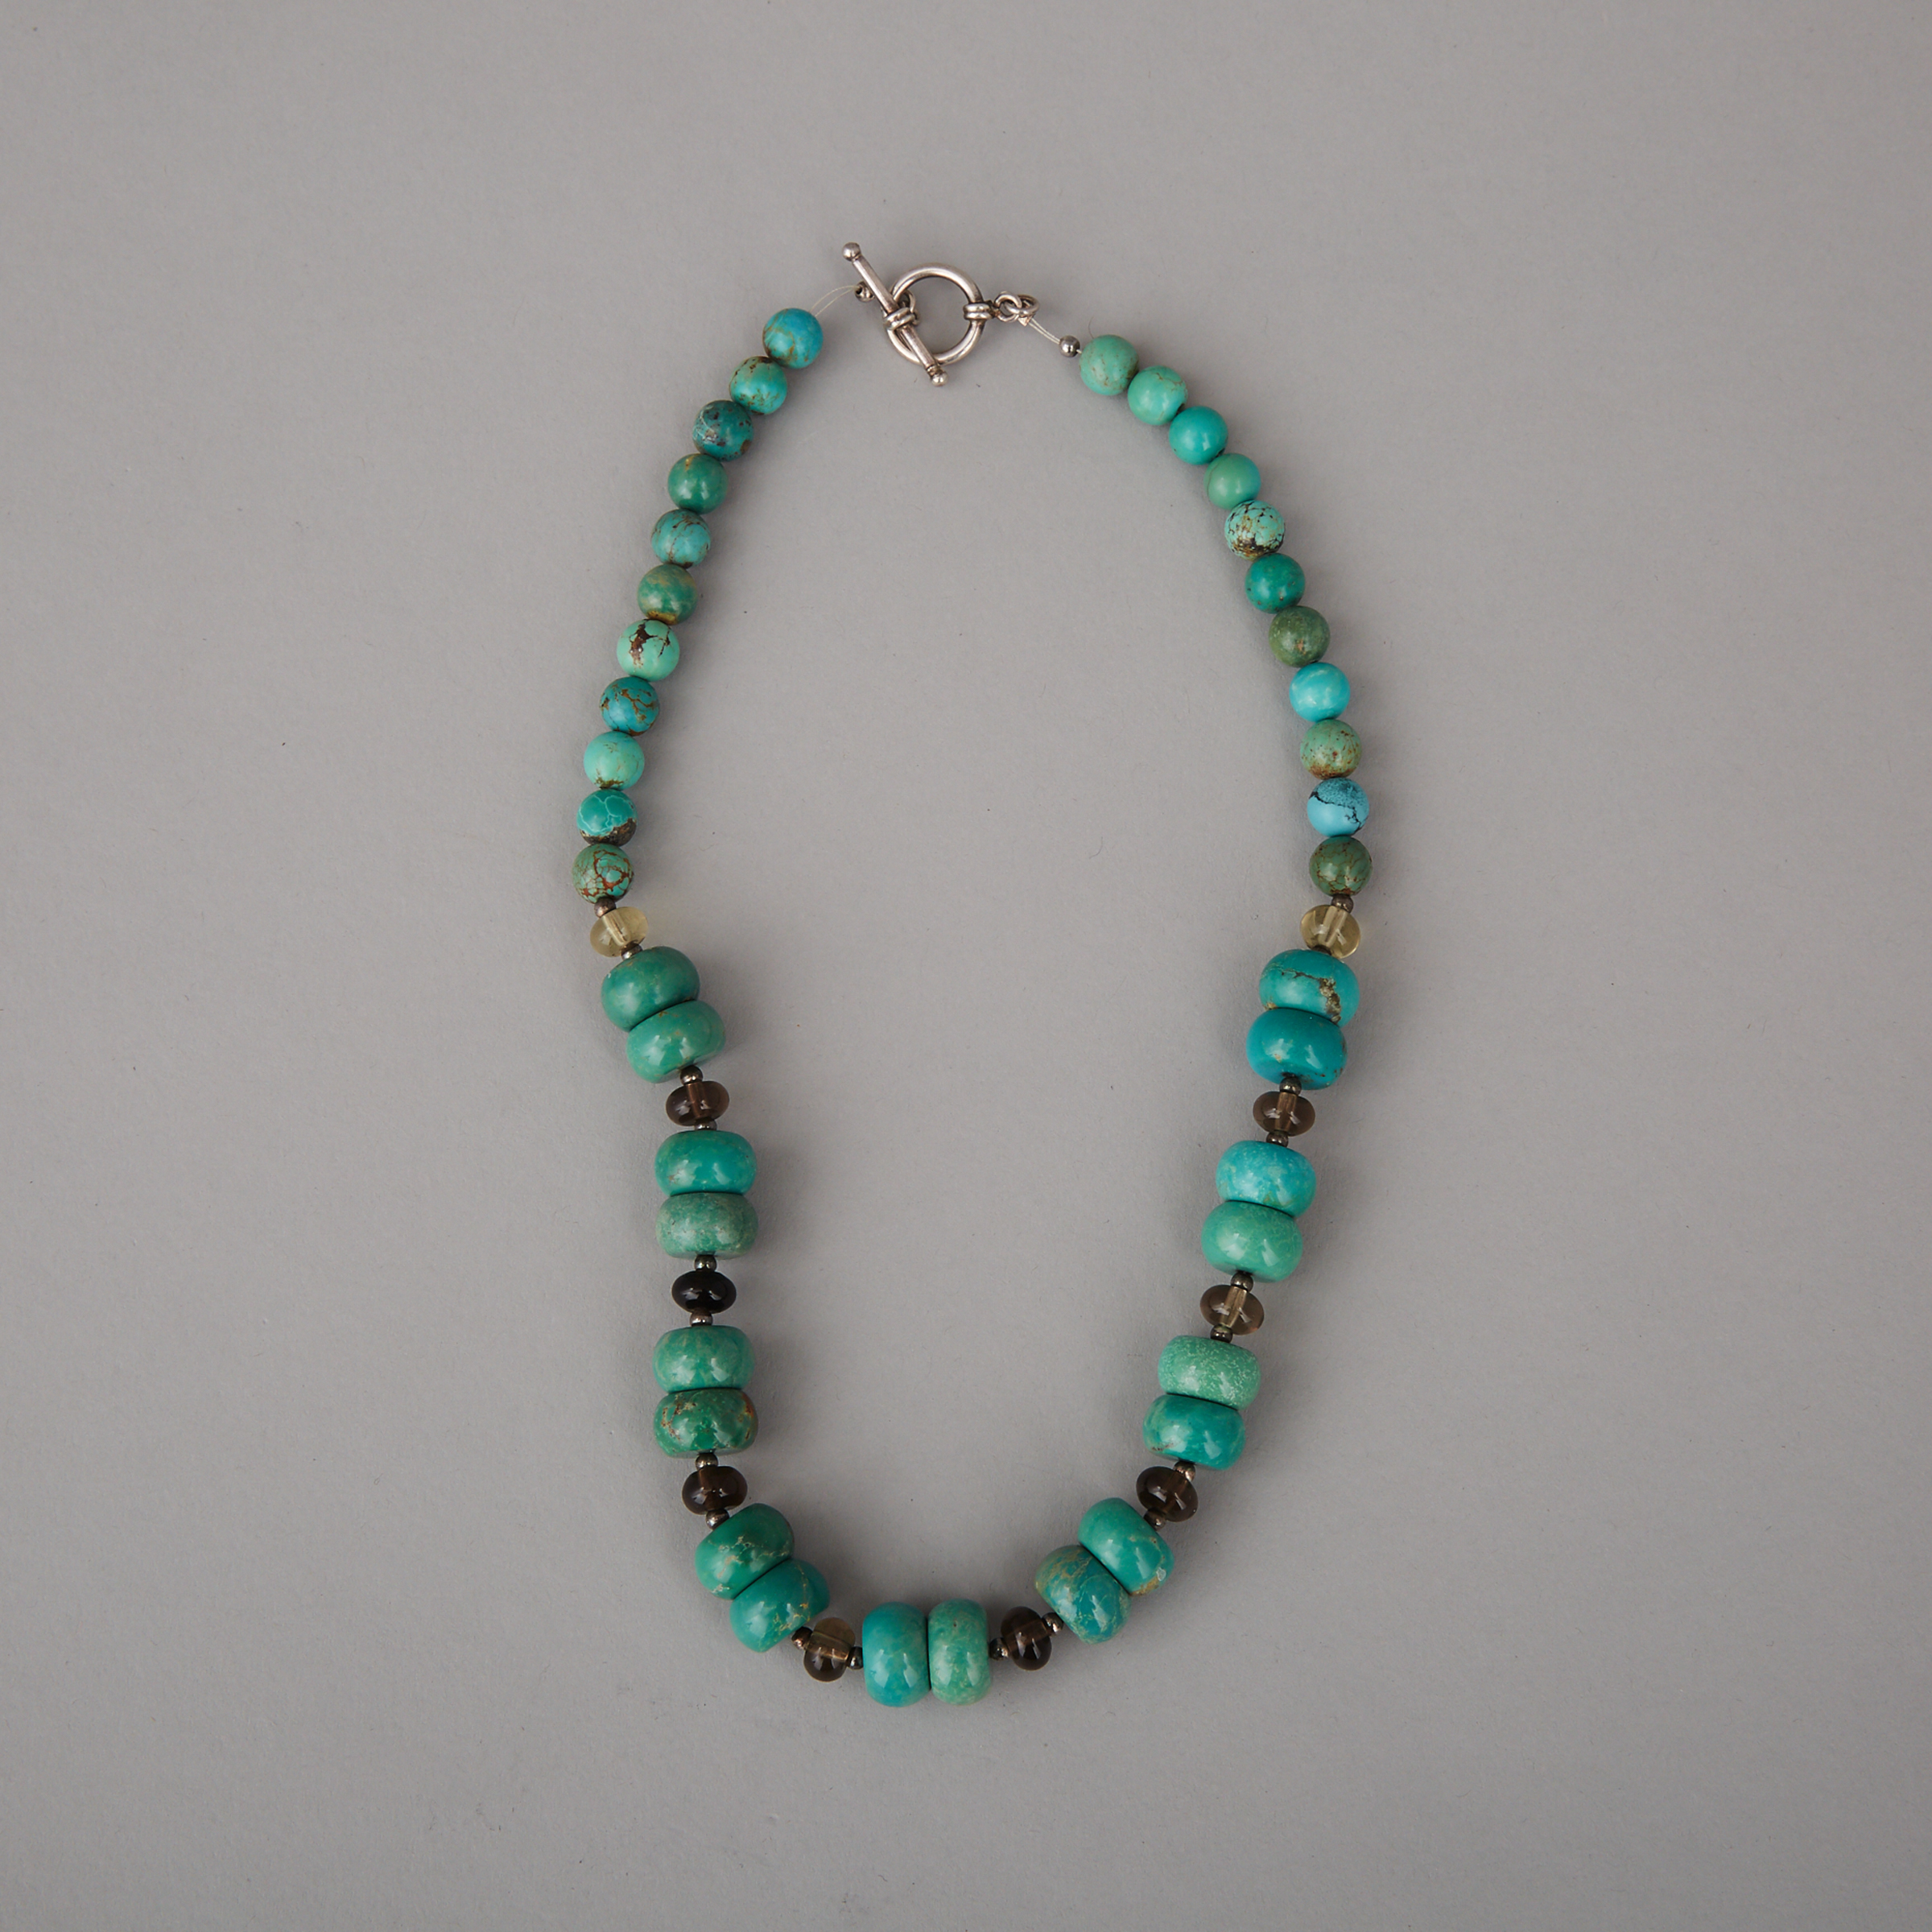 A Turquoise Beaded Necklace